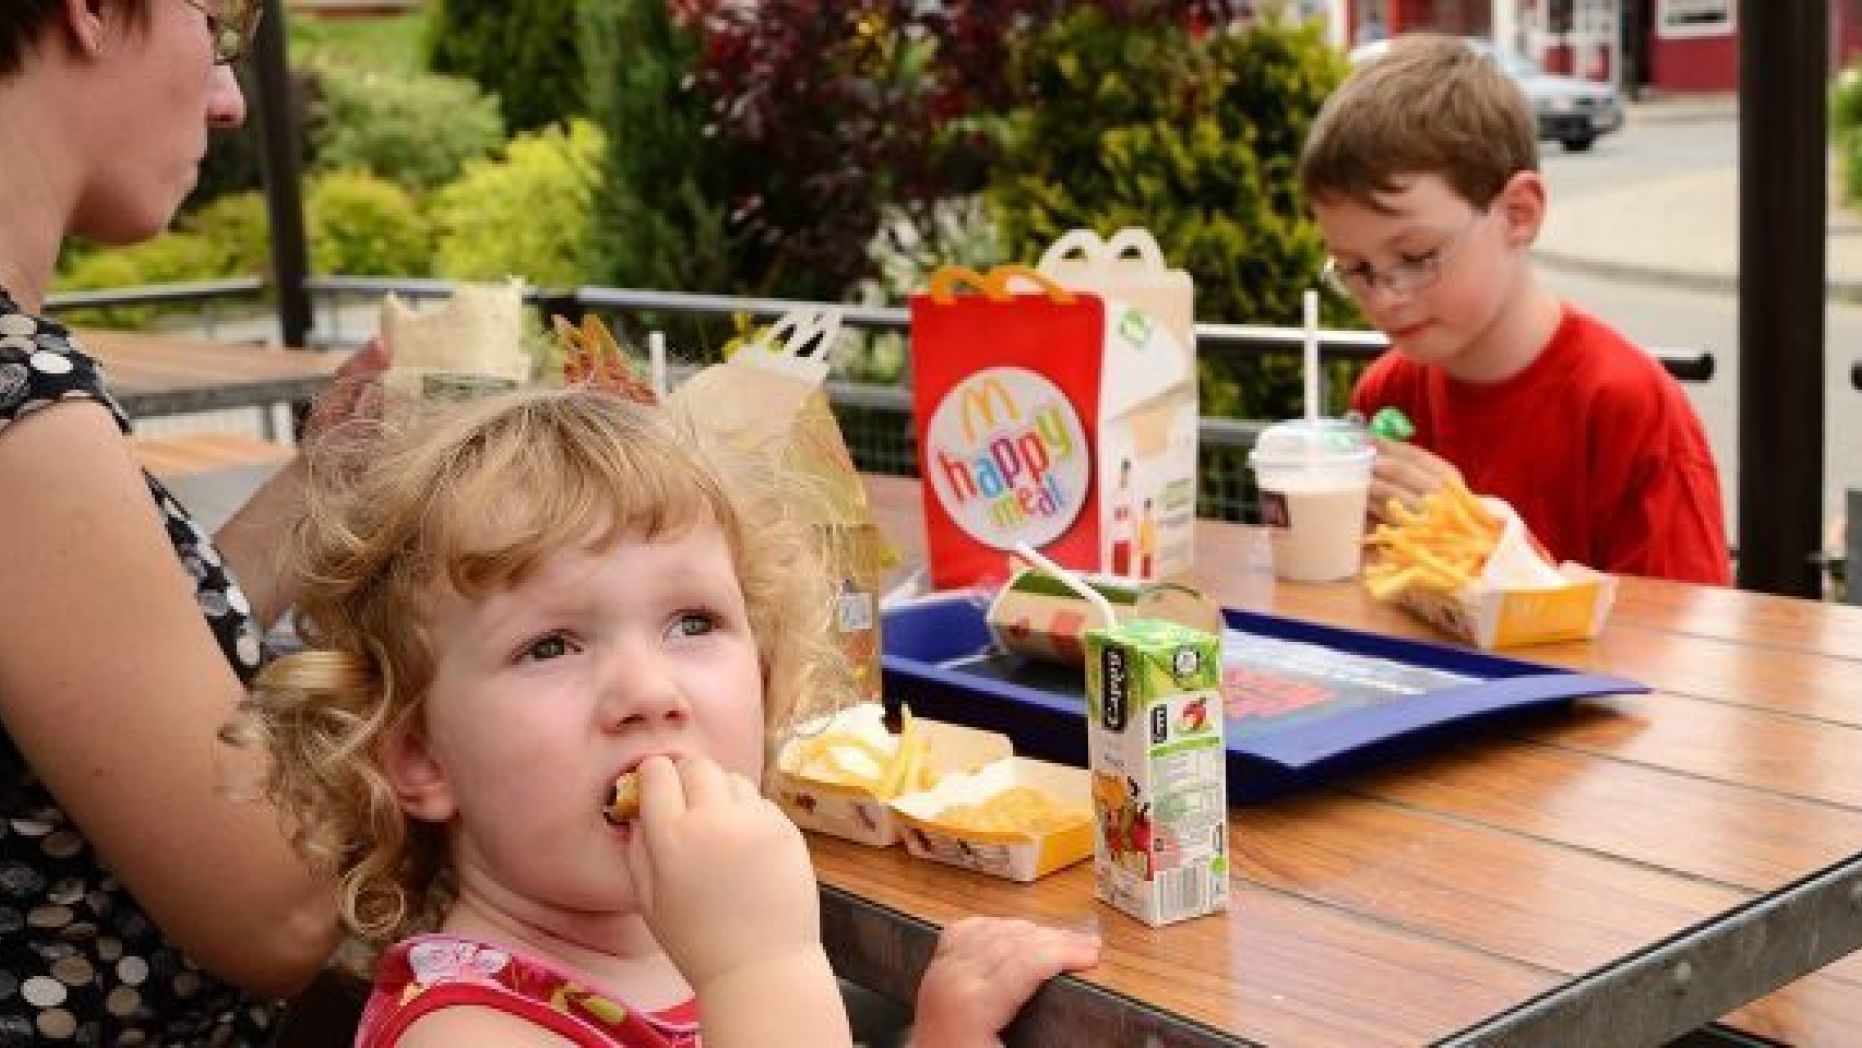 McDonald's being sued for marketing Happy Meals to kids